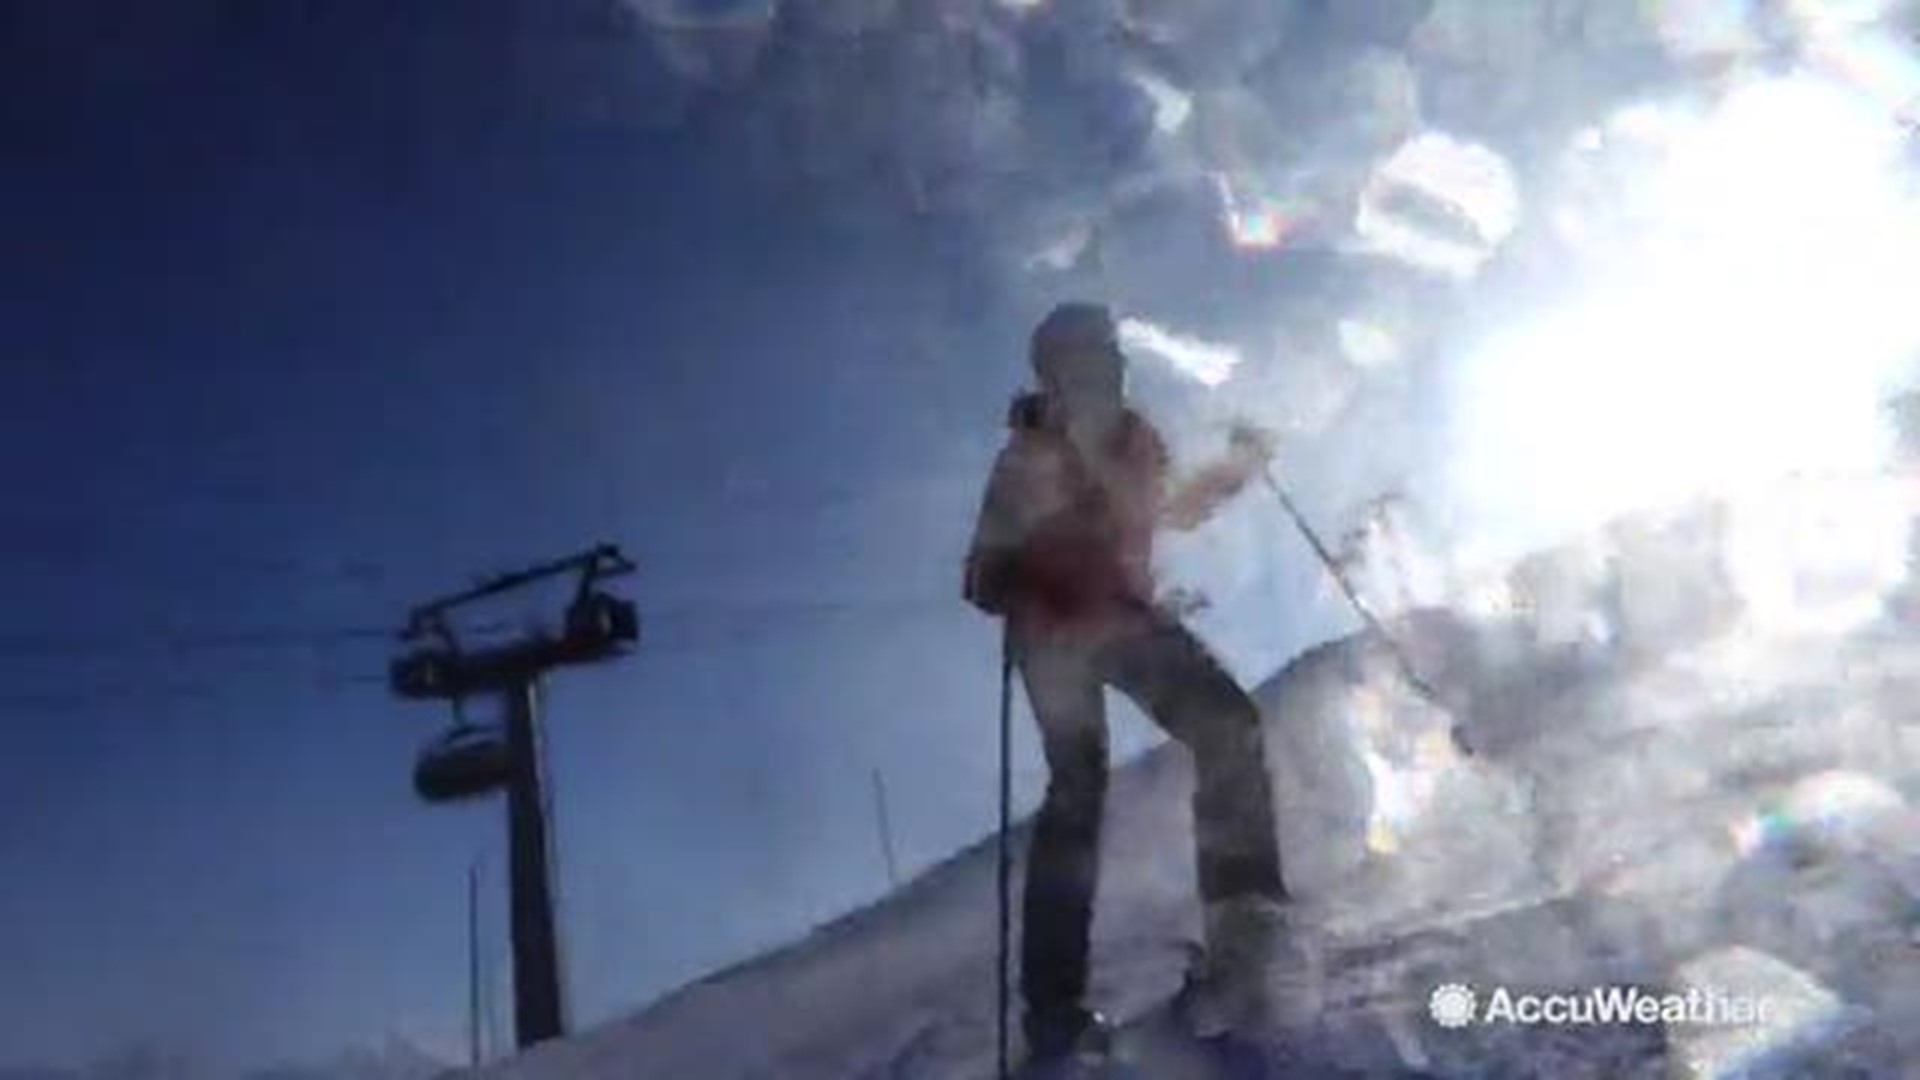 Many ski resorts across the country got to enjoy some early season snowfall and a lot of it.  The hype is so strong, that not even tornadoes could stop it for skiing enthusiasts in the Poconos either earlier in the fall.